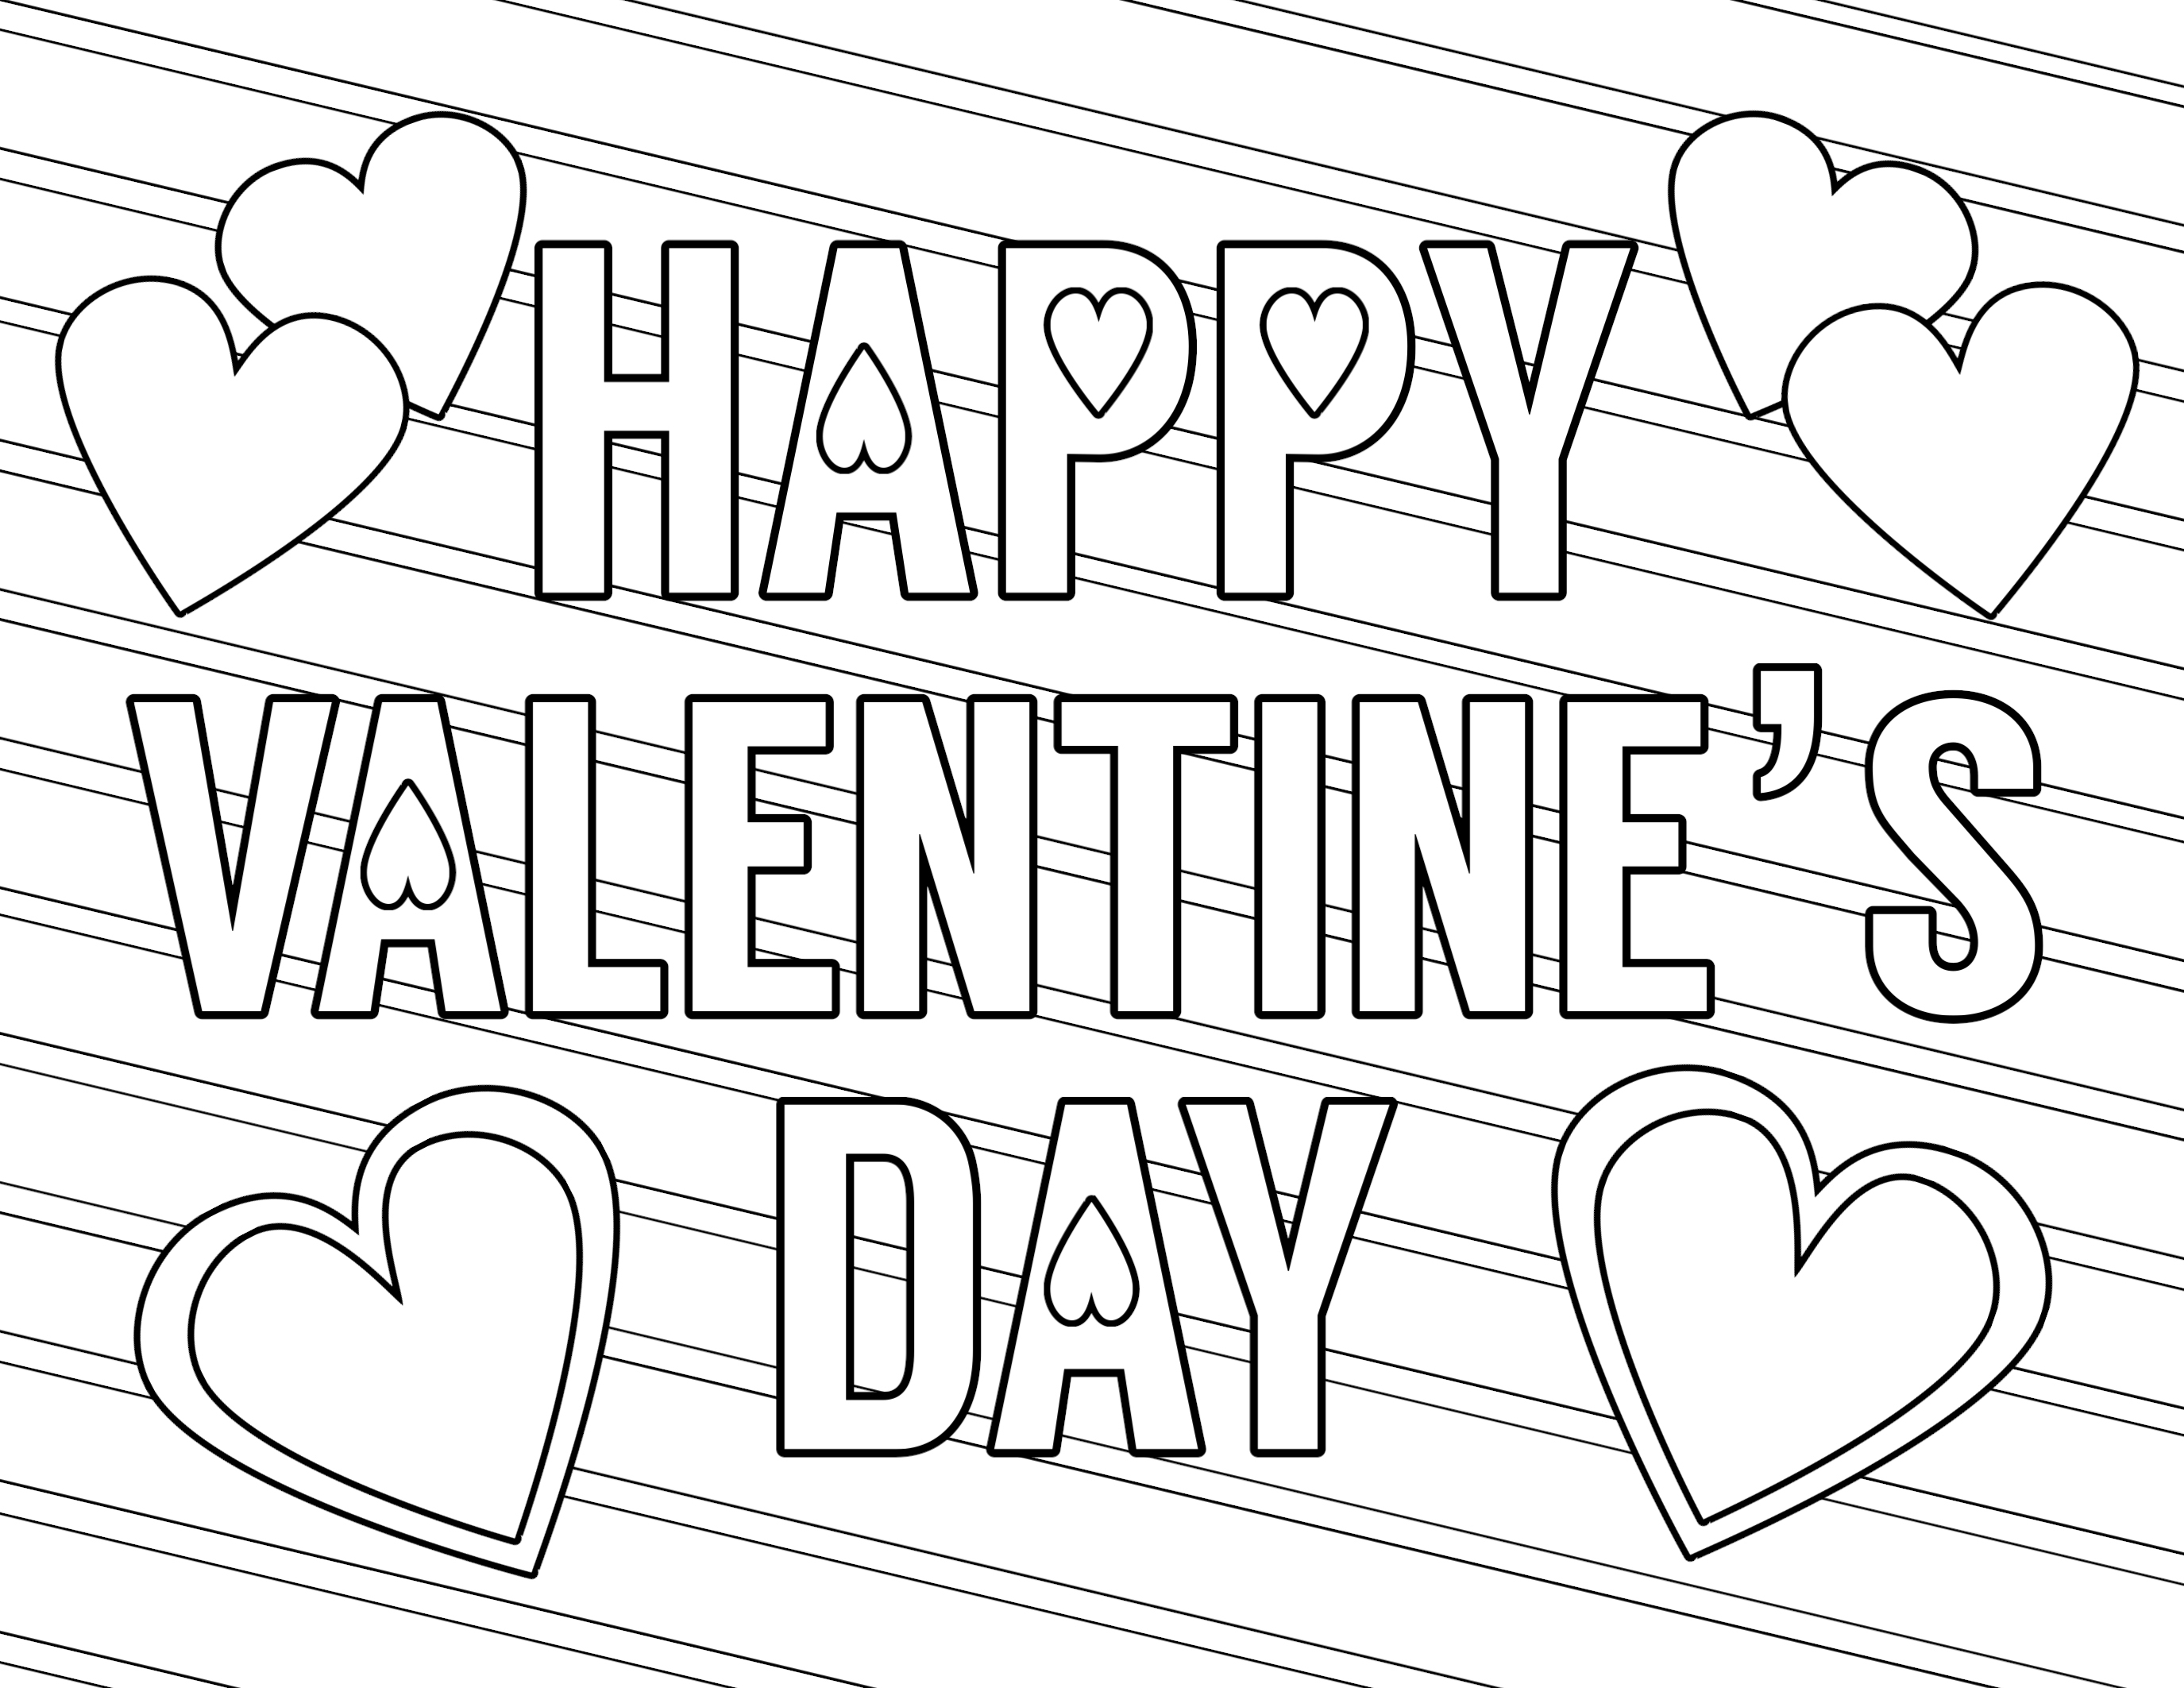 Coloring Pages : Coloring Pages Valentines Day Page Printable - Free Printable Valentine Coloring Pages